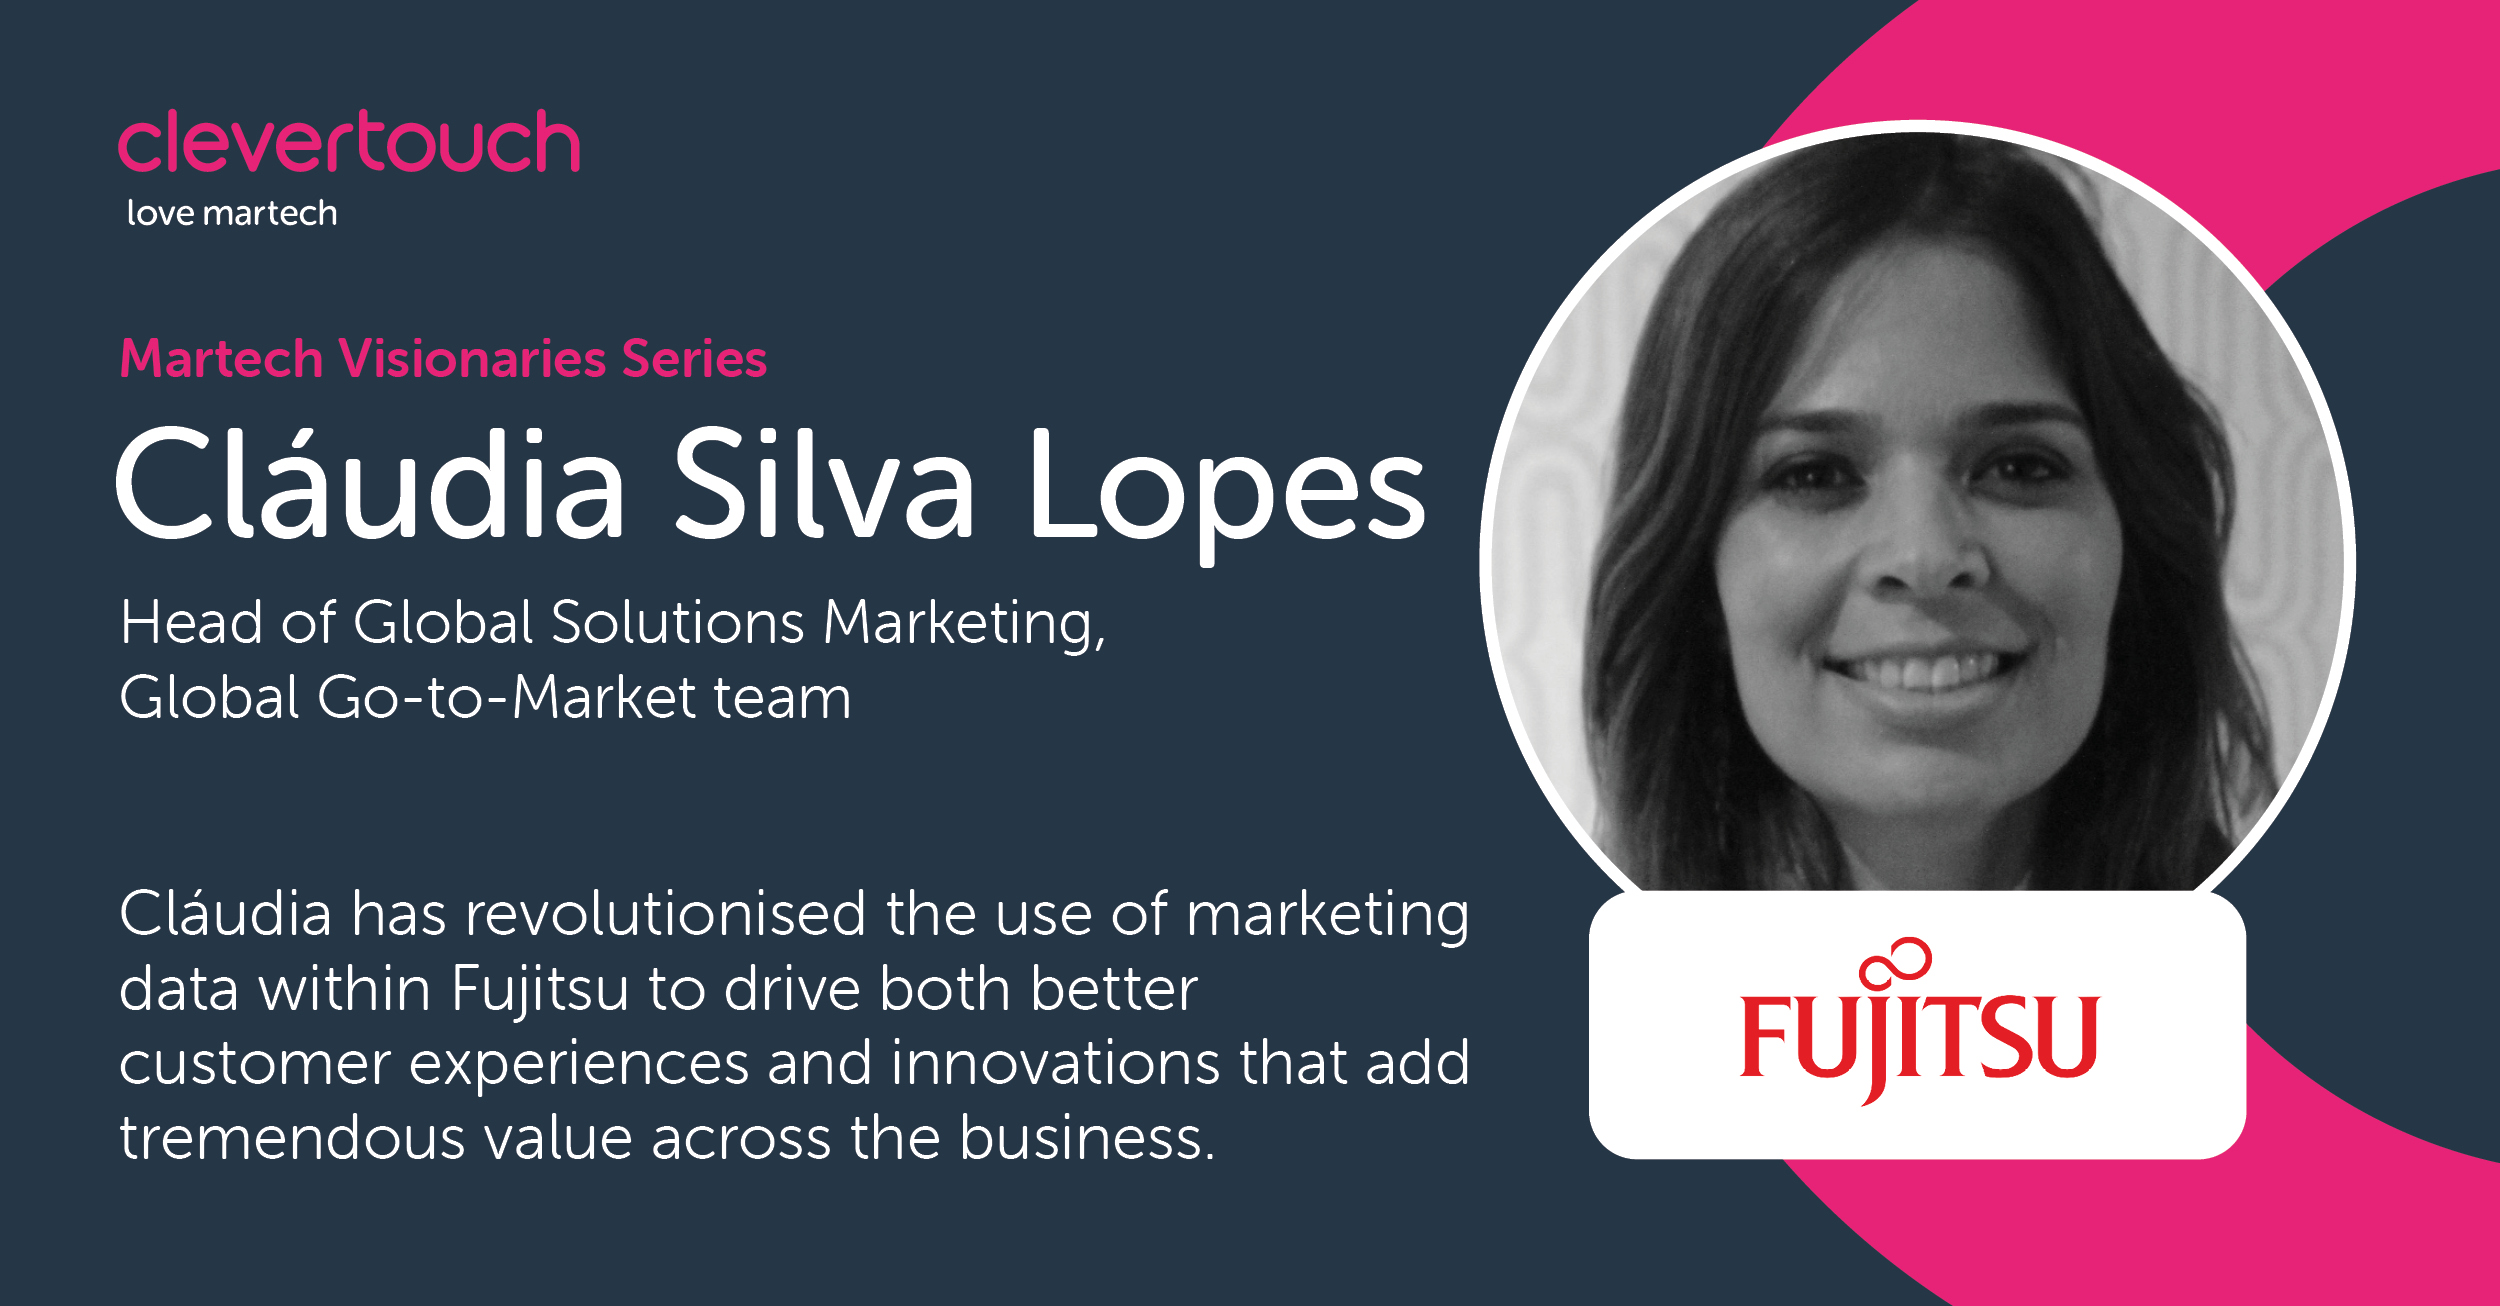 Clevertouch - Martech Visionaries Series. Claudia, Global Solutions Marketing at Fujitsu, revolutionizing marketing data usage for enhanced experiences.